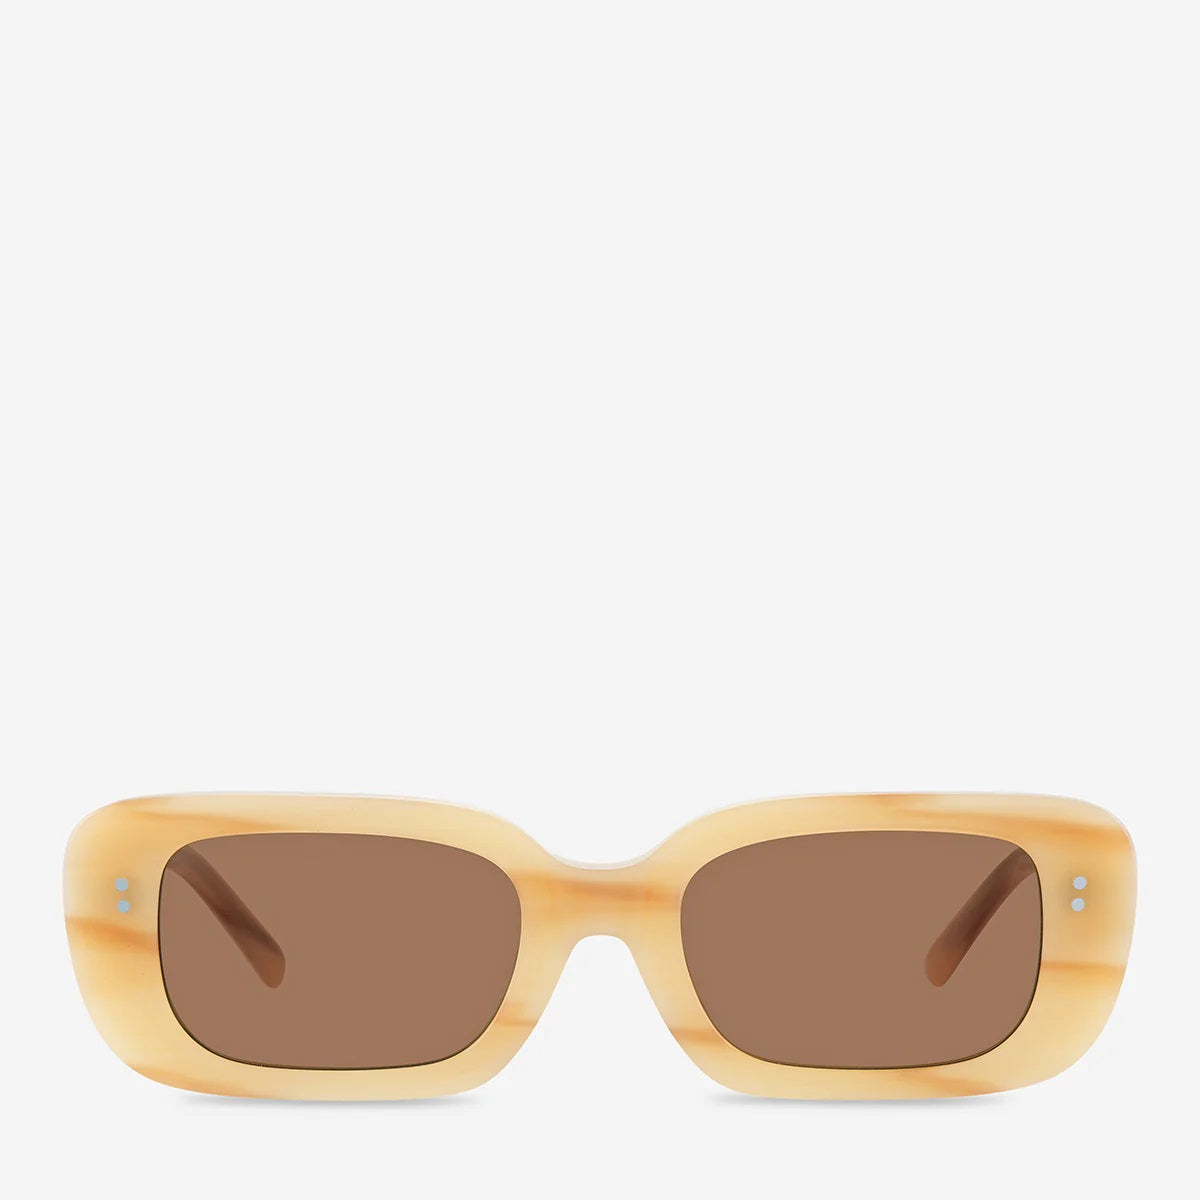 Status Anxiety Solitary Sunglasses [COLOUR:Blonde]